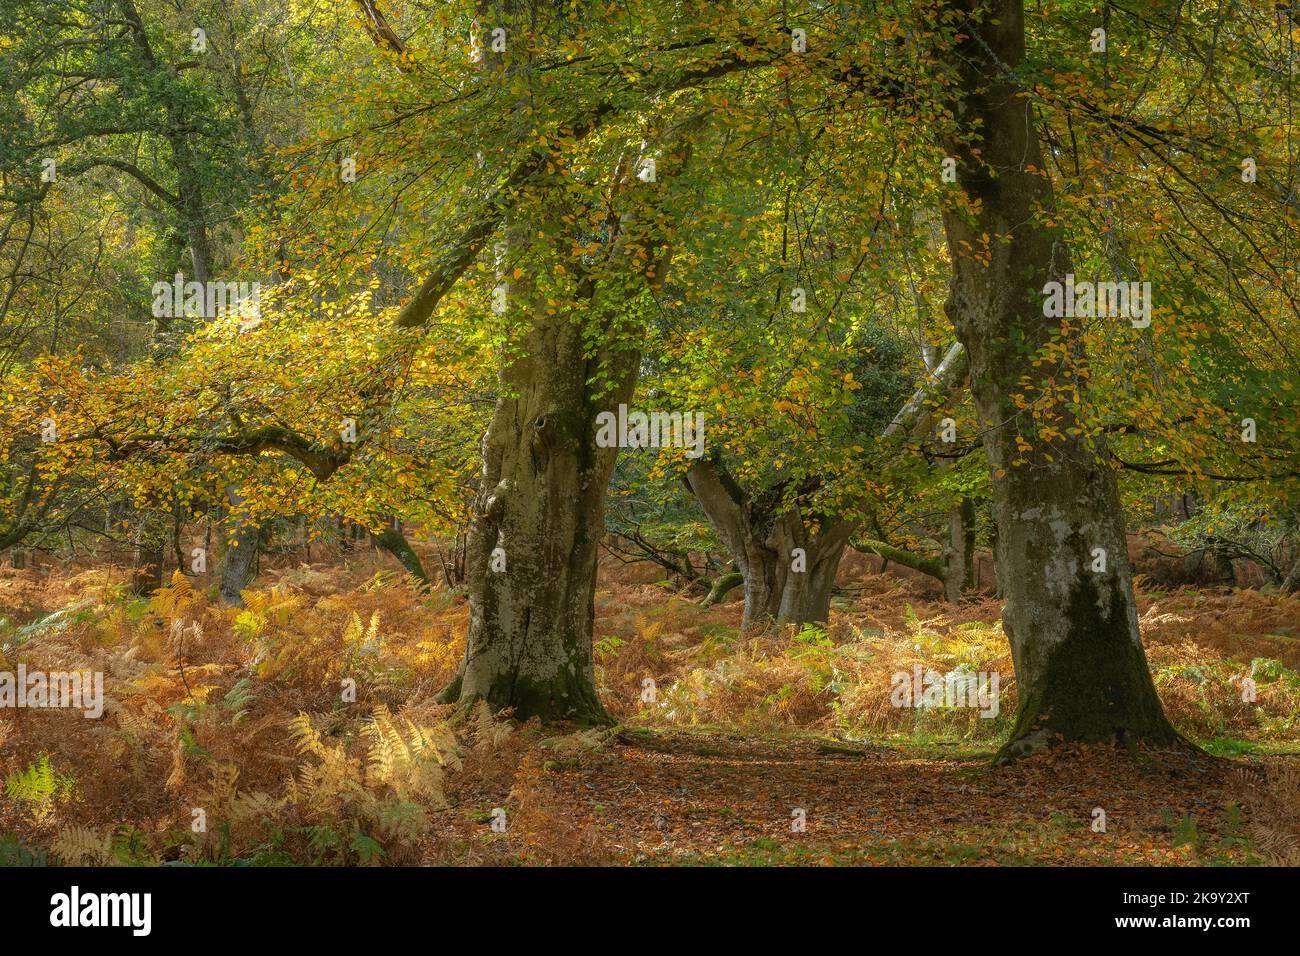 Autumn woodland scene in Bolderwood in the New Forest National Park, Hampshire, England, UK, with ancient beech trees changing colour. Stock Photo